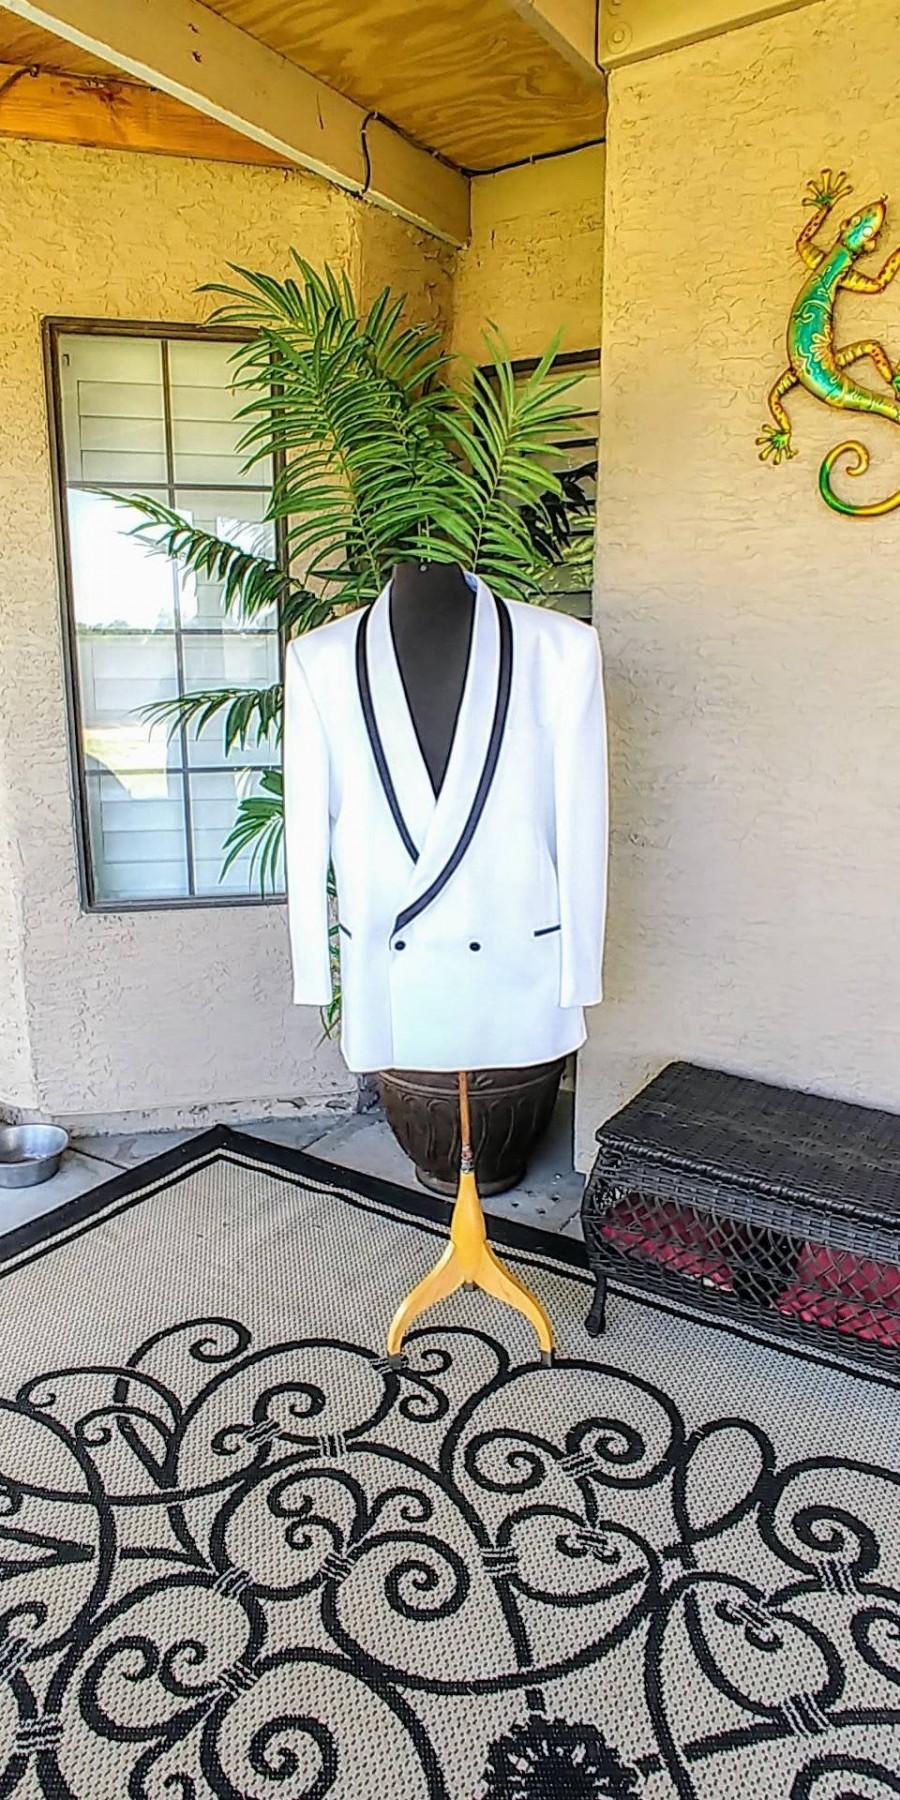 Mariage - Men's White Vintage Tuxedo Jacket. The Formal Wear Collection by Raffinati Made in U.S.A. Beautiful Jacket White with Black Trim. Size 50 L